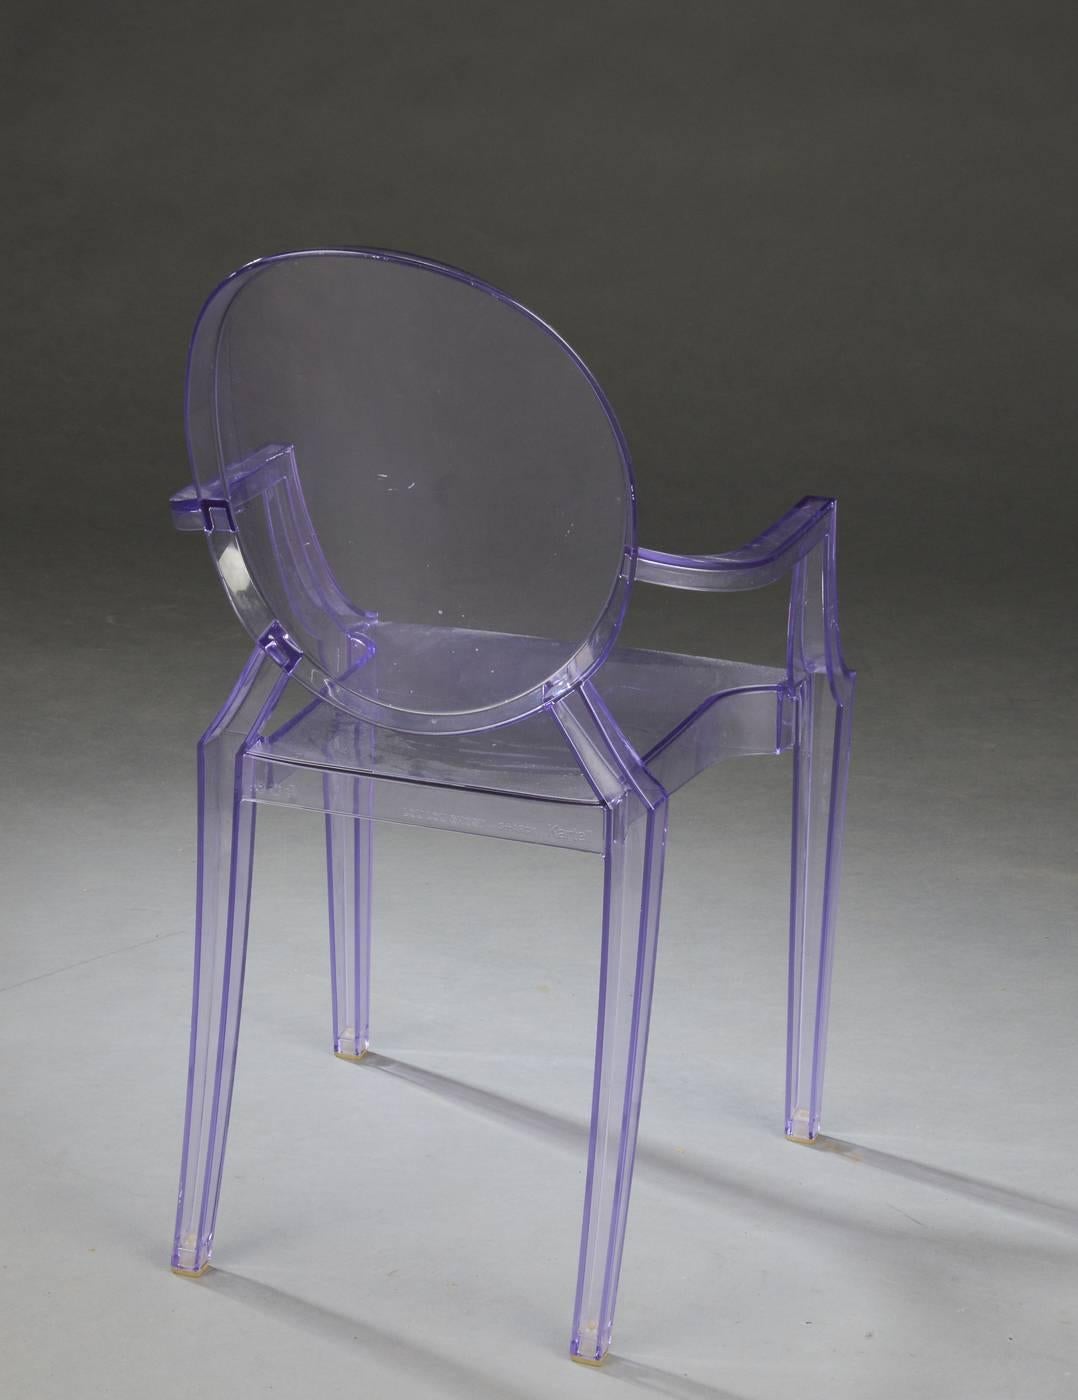 Purple polycarbonate armchair designed by Philippe Starck in 2003 for Kartell.
2 pieces available